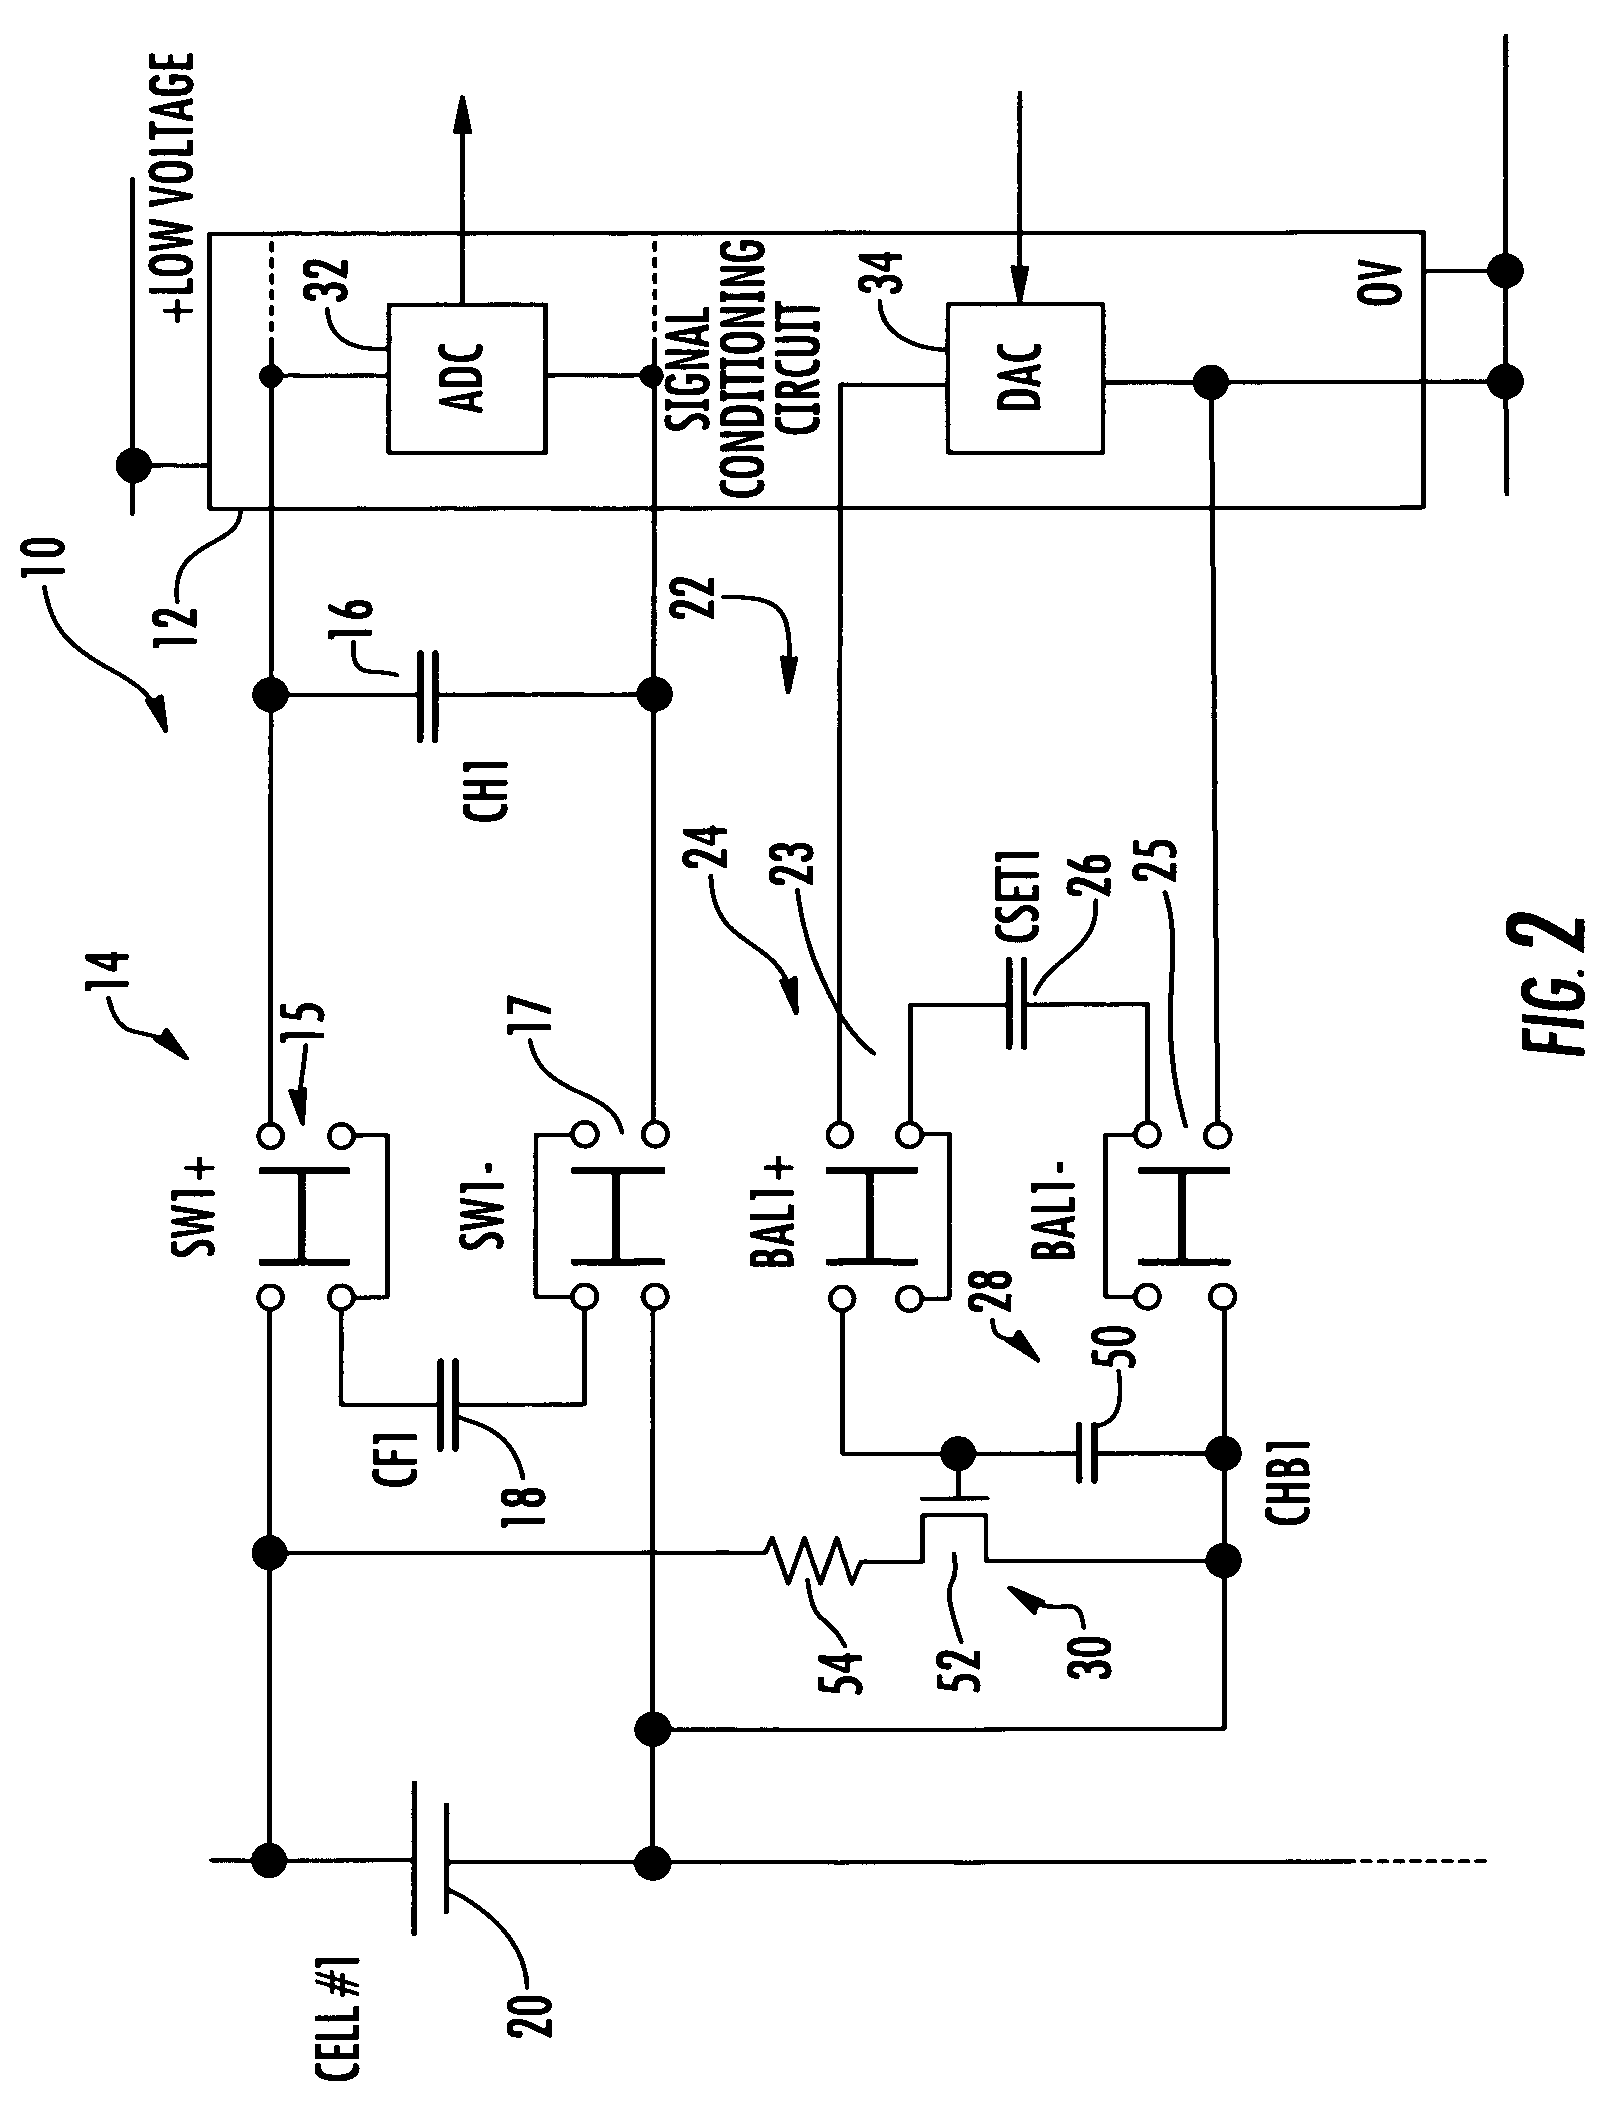 Galvanically isolated charge balance system